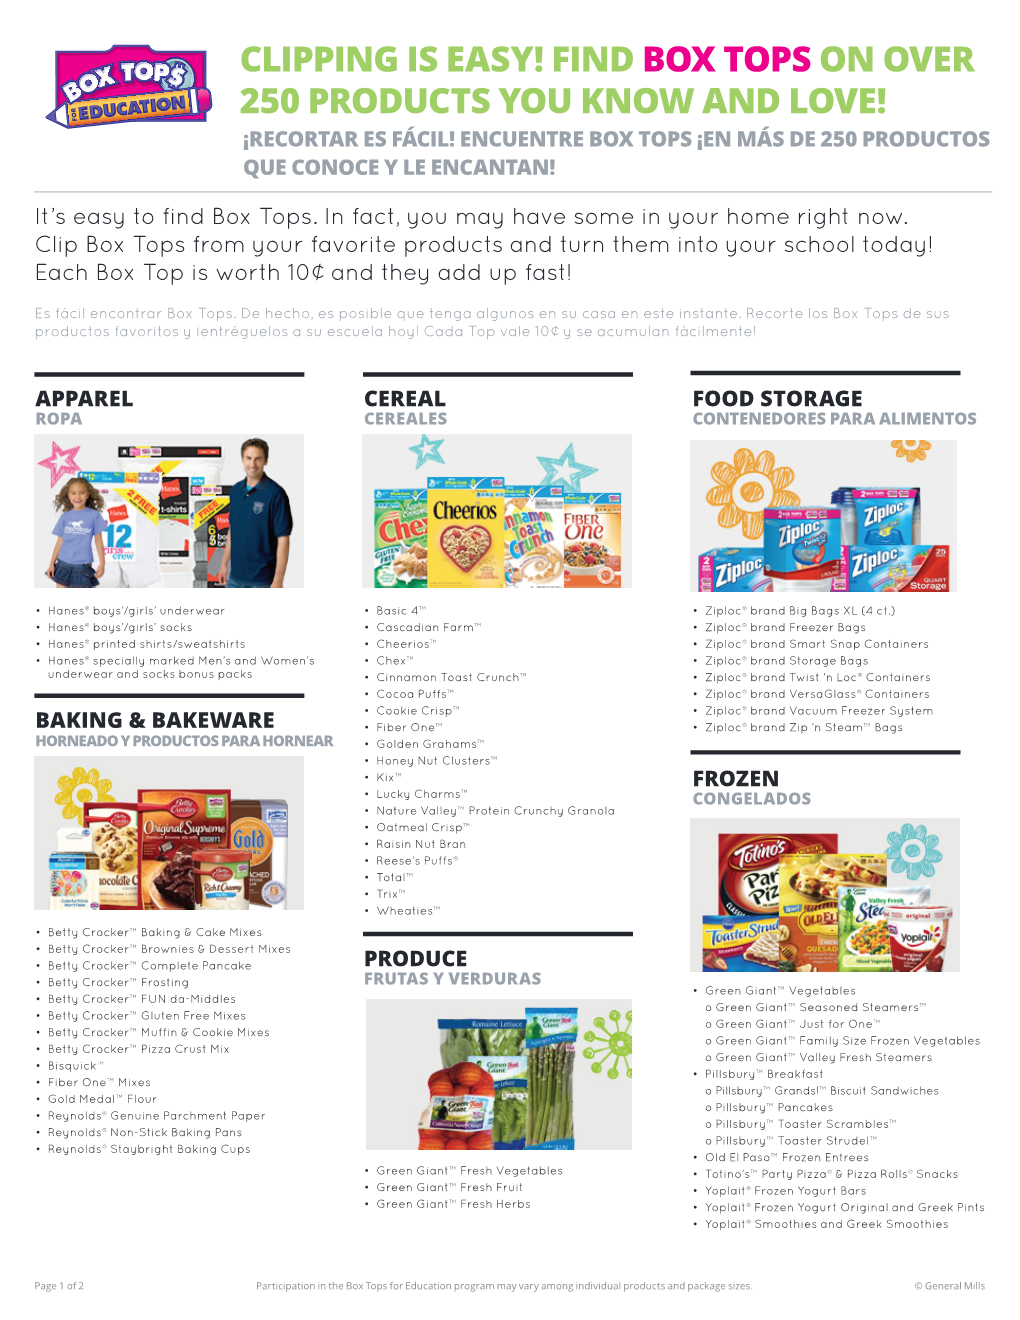 Clipping Is Easy! Find Box Tops on Over 250 Products You Know and Love!